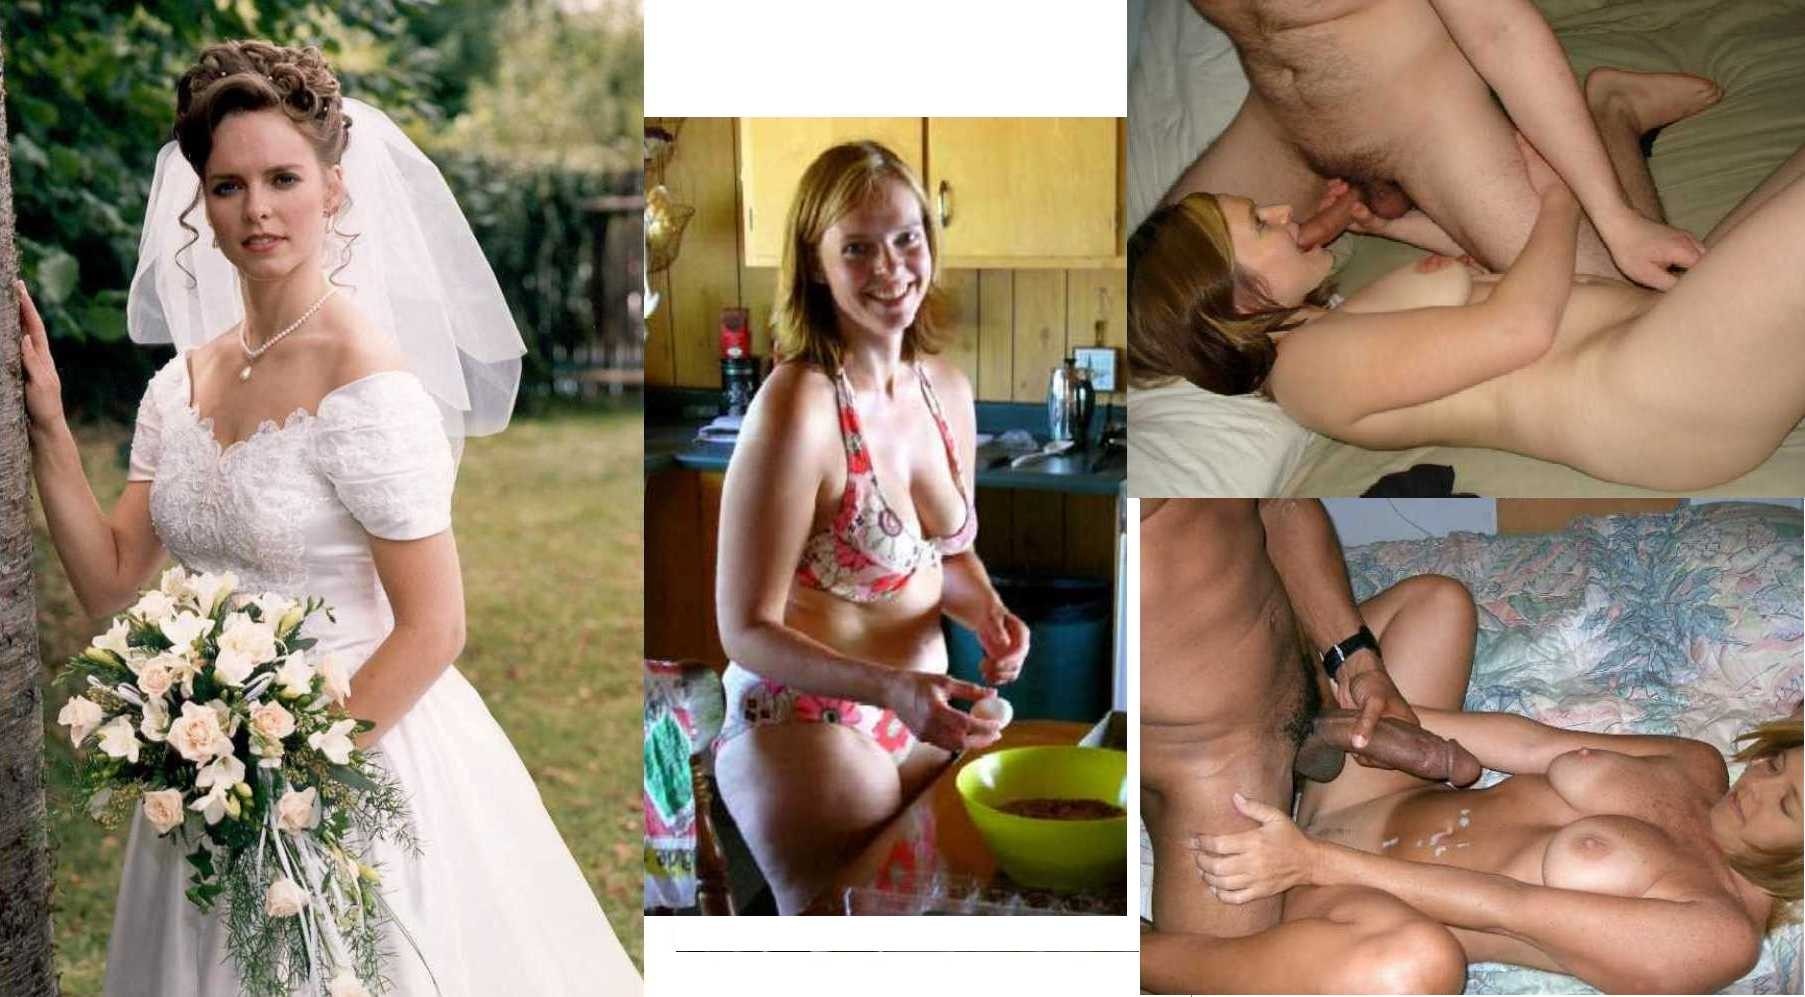 After Wedding Porn - Russian Sex After Marriage (60 photos) - sex eporner pics